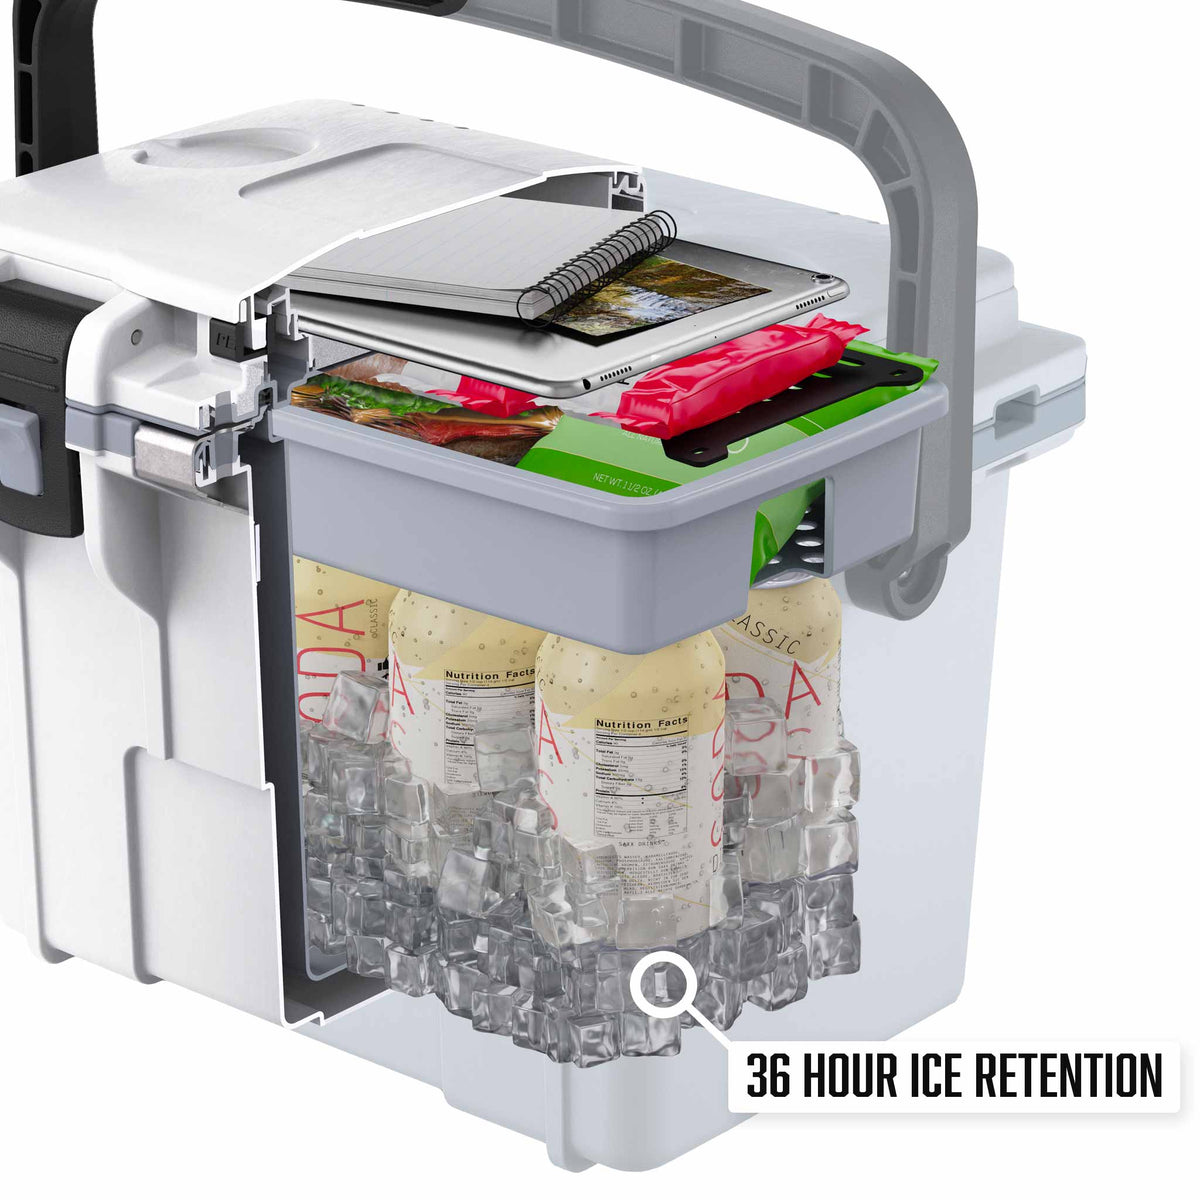 Pelican™ 14QT Personal Cooler &amp; Dry Box gets up to 36 hours of ice retention 